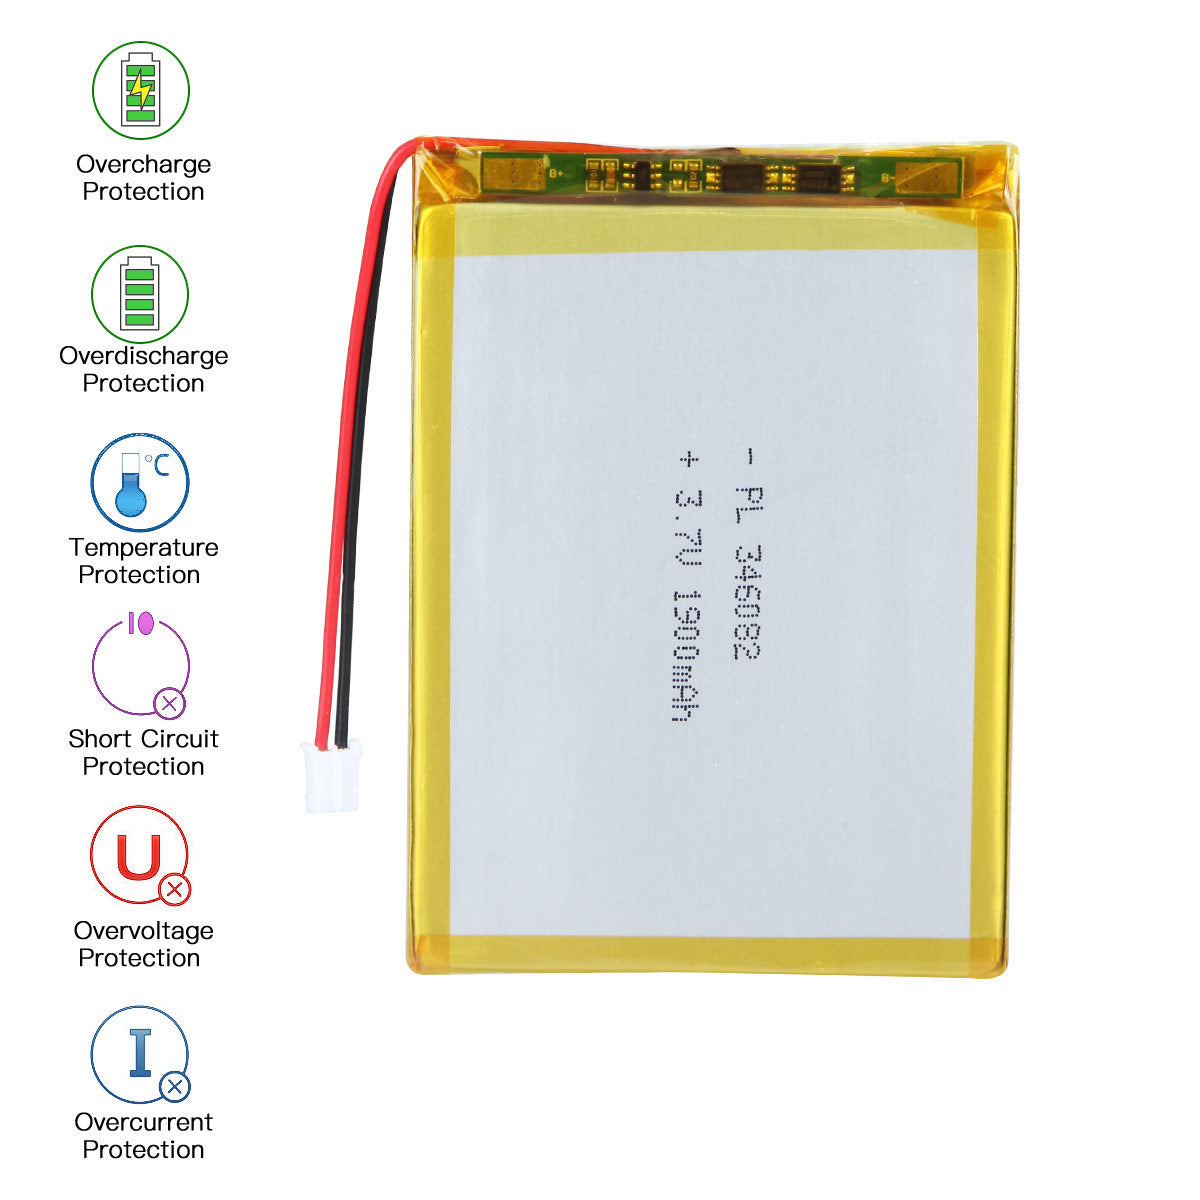 3.7V 1900mAh 346082 Rechargeable Lithium Polymer Battery